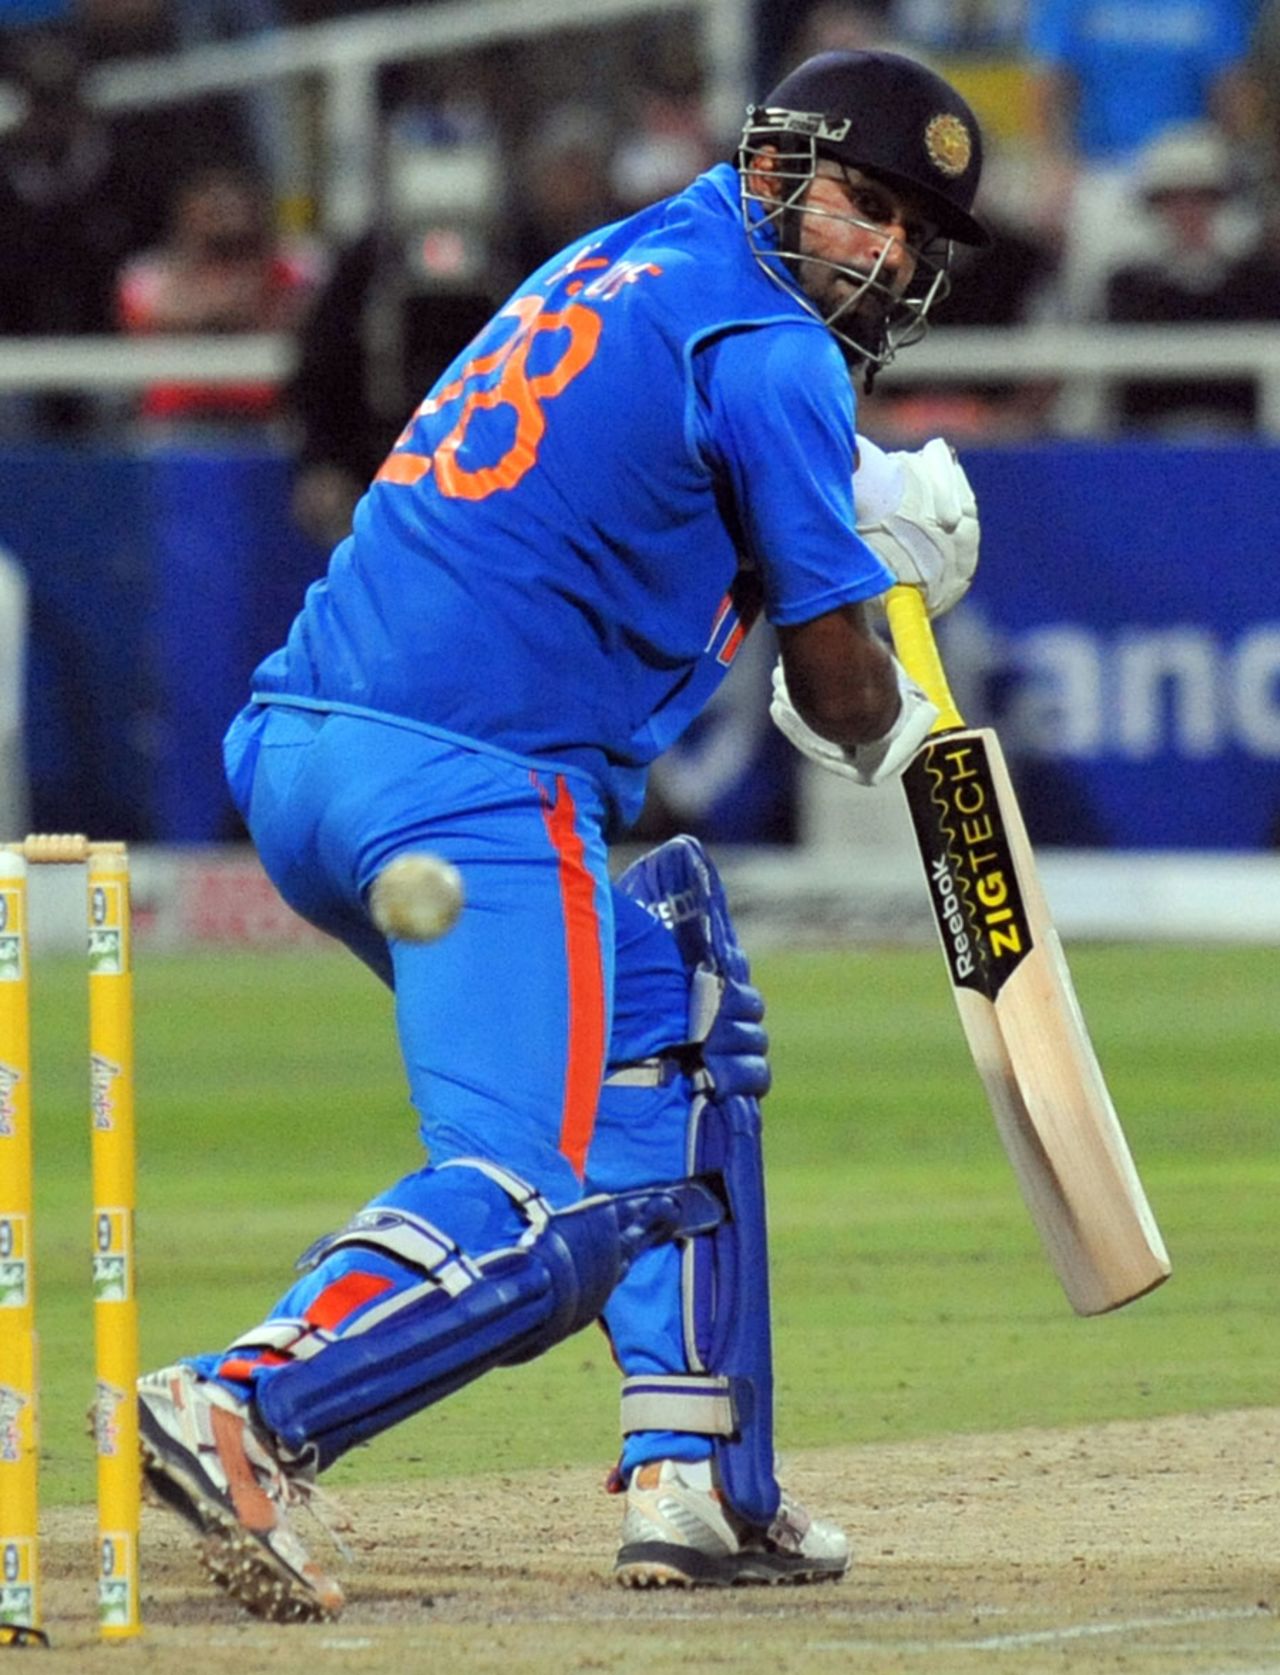 Yusuf Pathan reaches his half-century with an outside-edge for two runs, South Africa v India, 3rd ODI, Cape Town, January 18, 2011